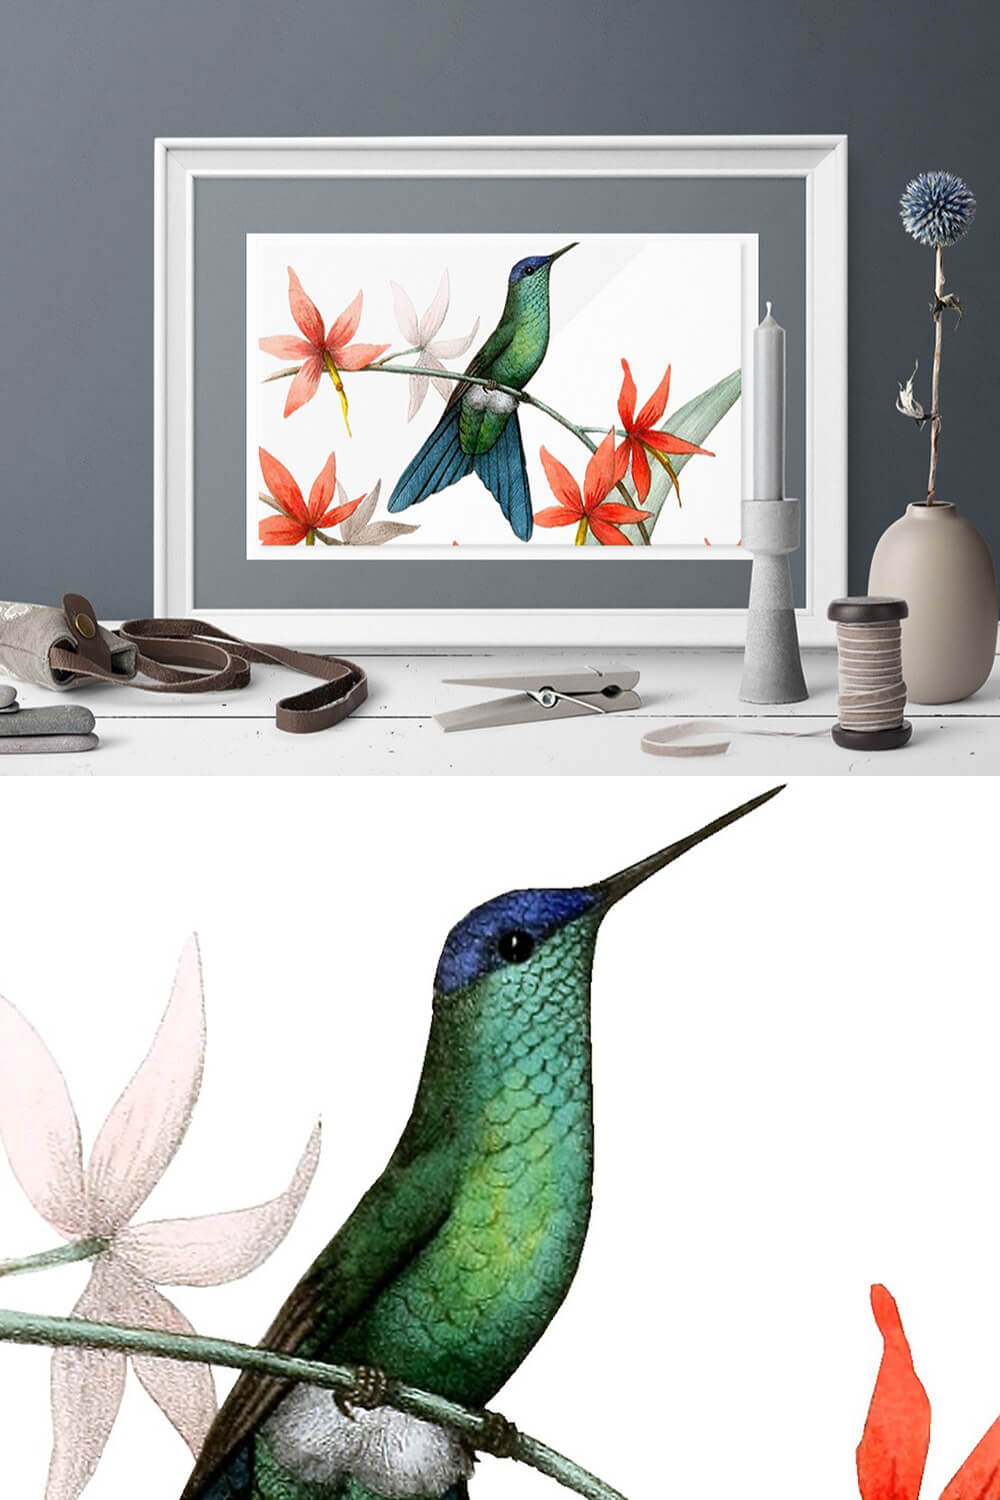 Drawn hummingbird on a white background in a gray room.